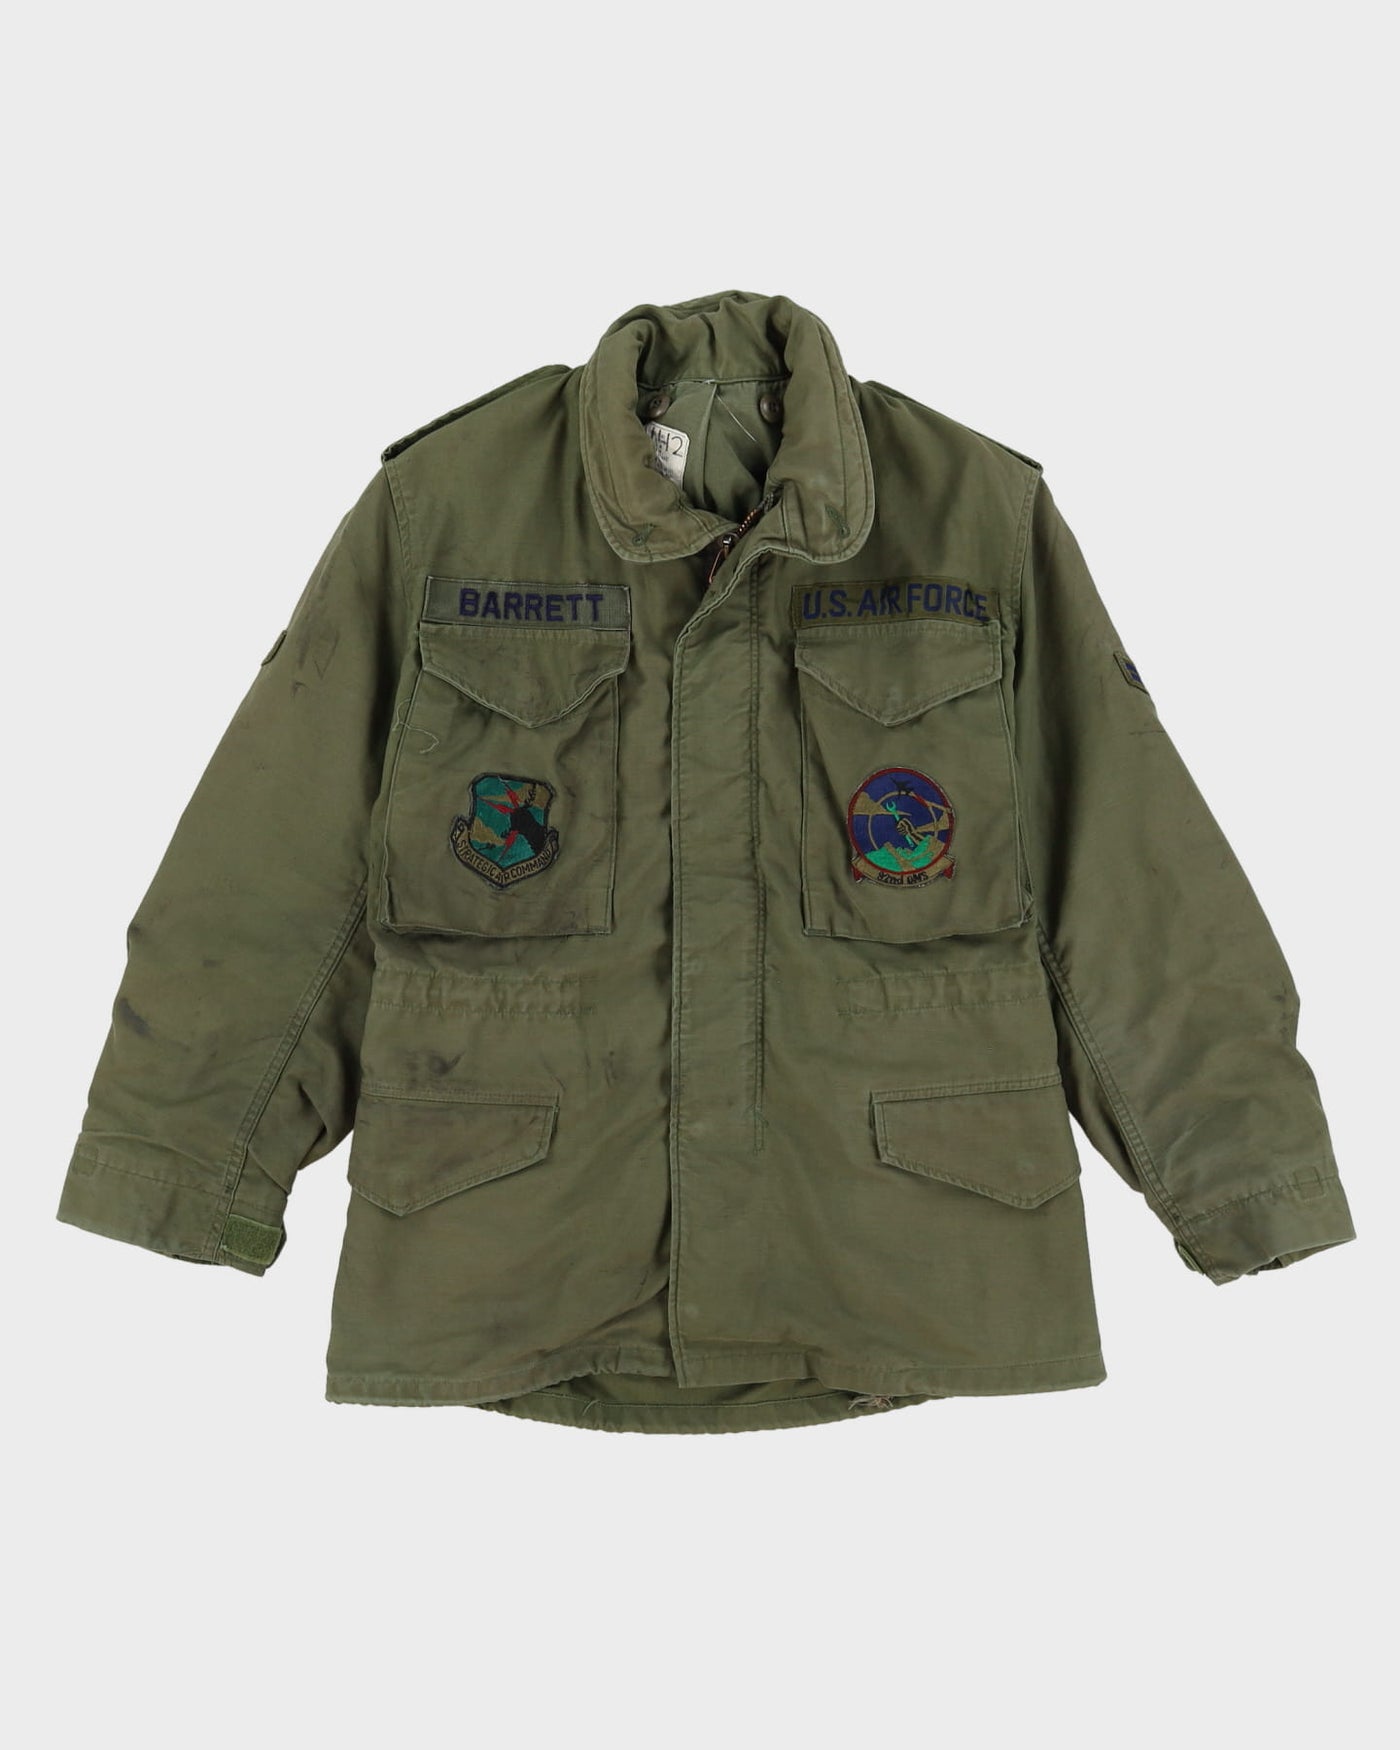 70s Vintage US Air Force OG-107 M65 Field jacket - X-Small